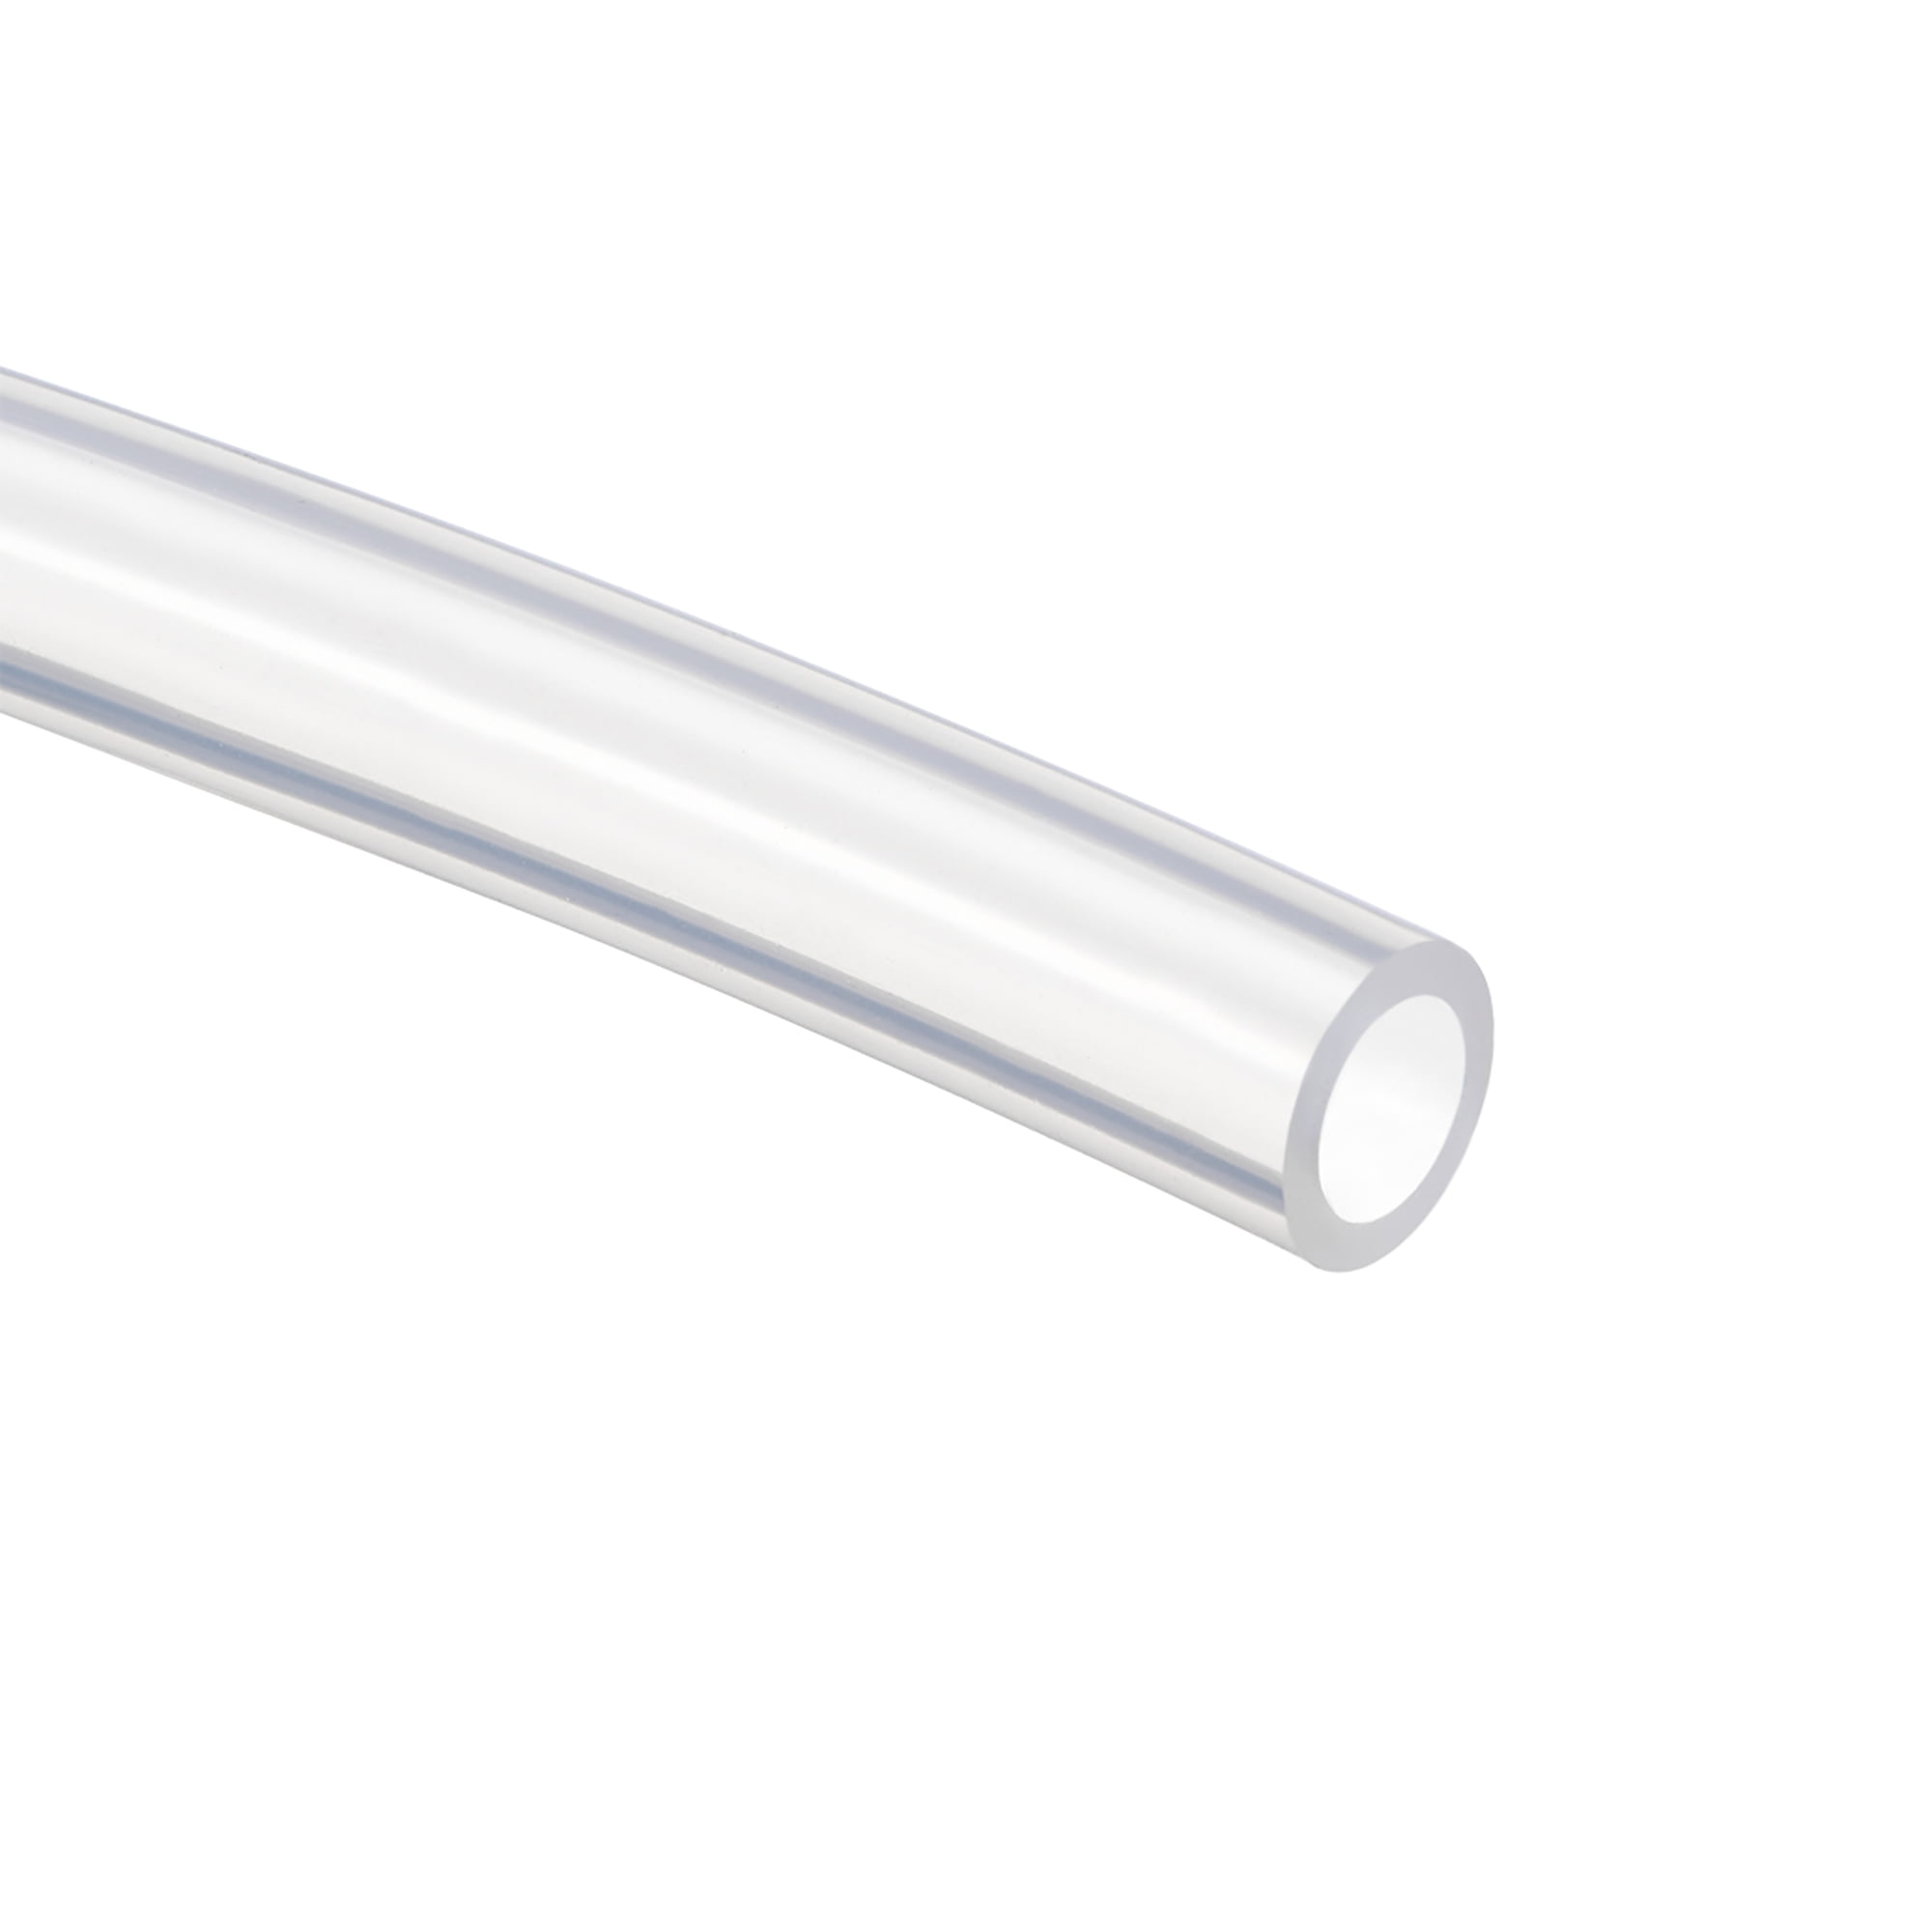 5/16 inch ID x 3/8 inch OD 10ft Rubber Tube Clear Silicone Tubing 